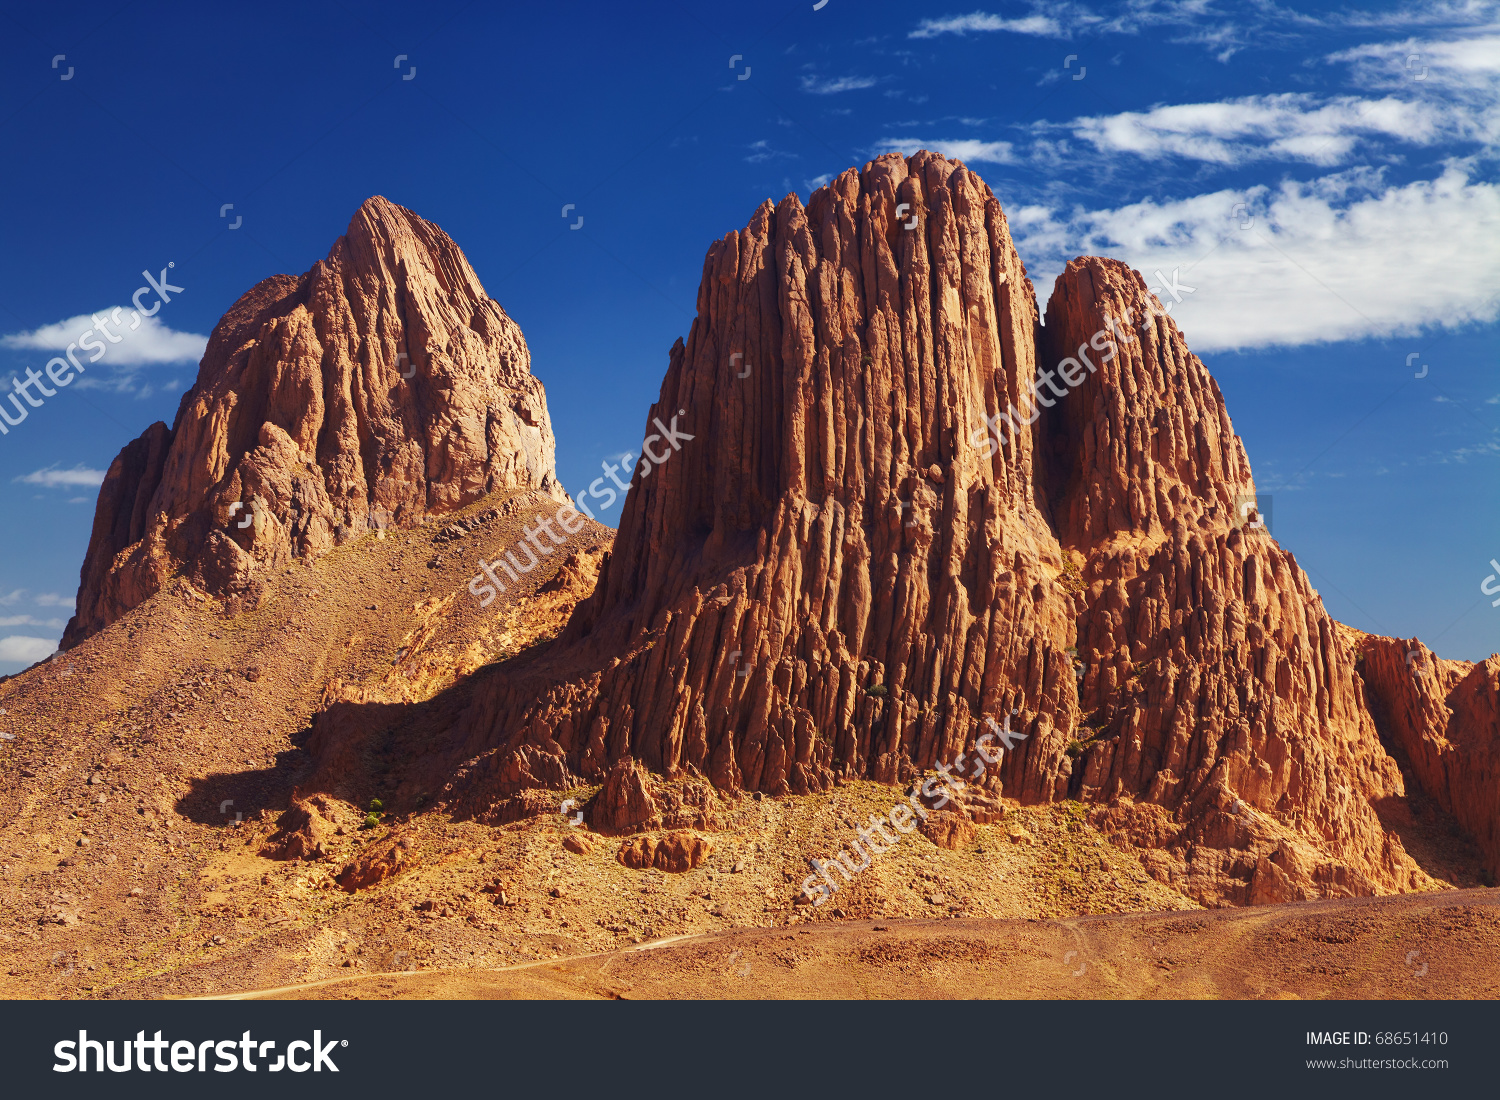 Hoggar Mountains clipart #19, Download drawings